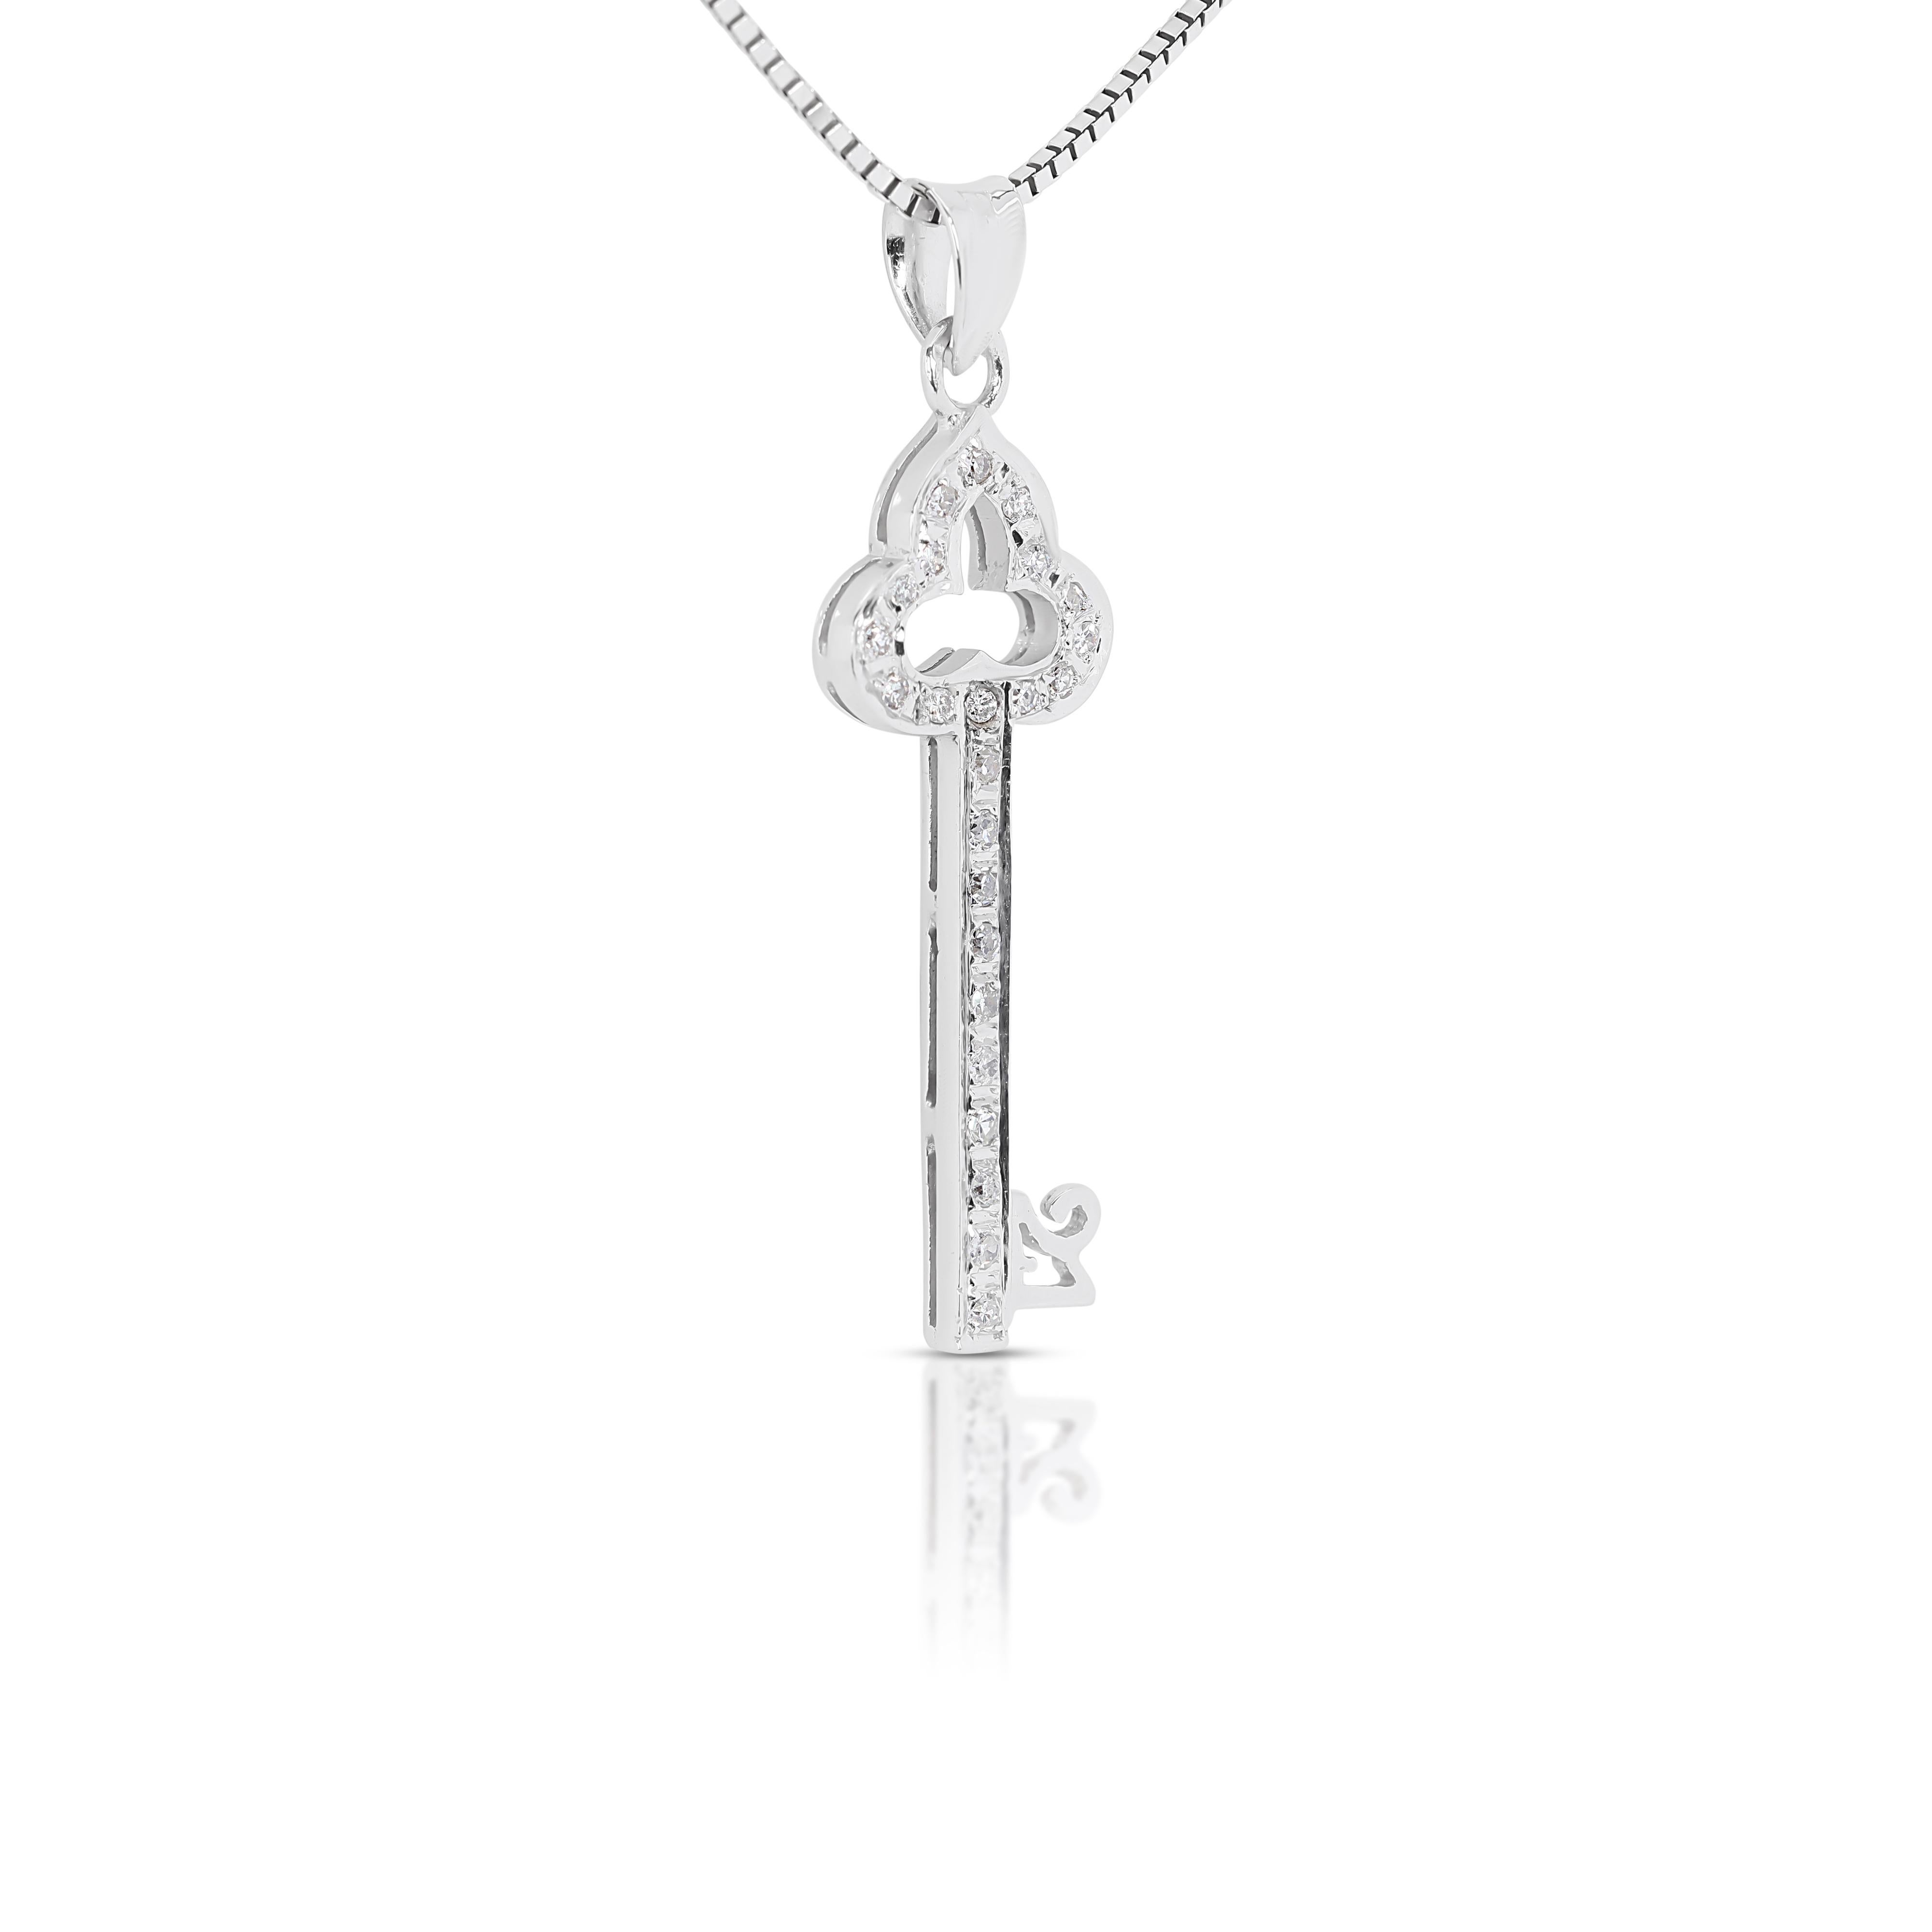 Round Cut Lovely 0.23ct Diamonds Pendant in 9K White Gold (Chain not Included) For Sale